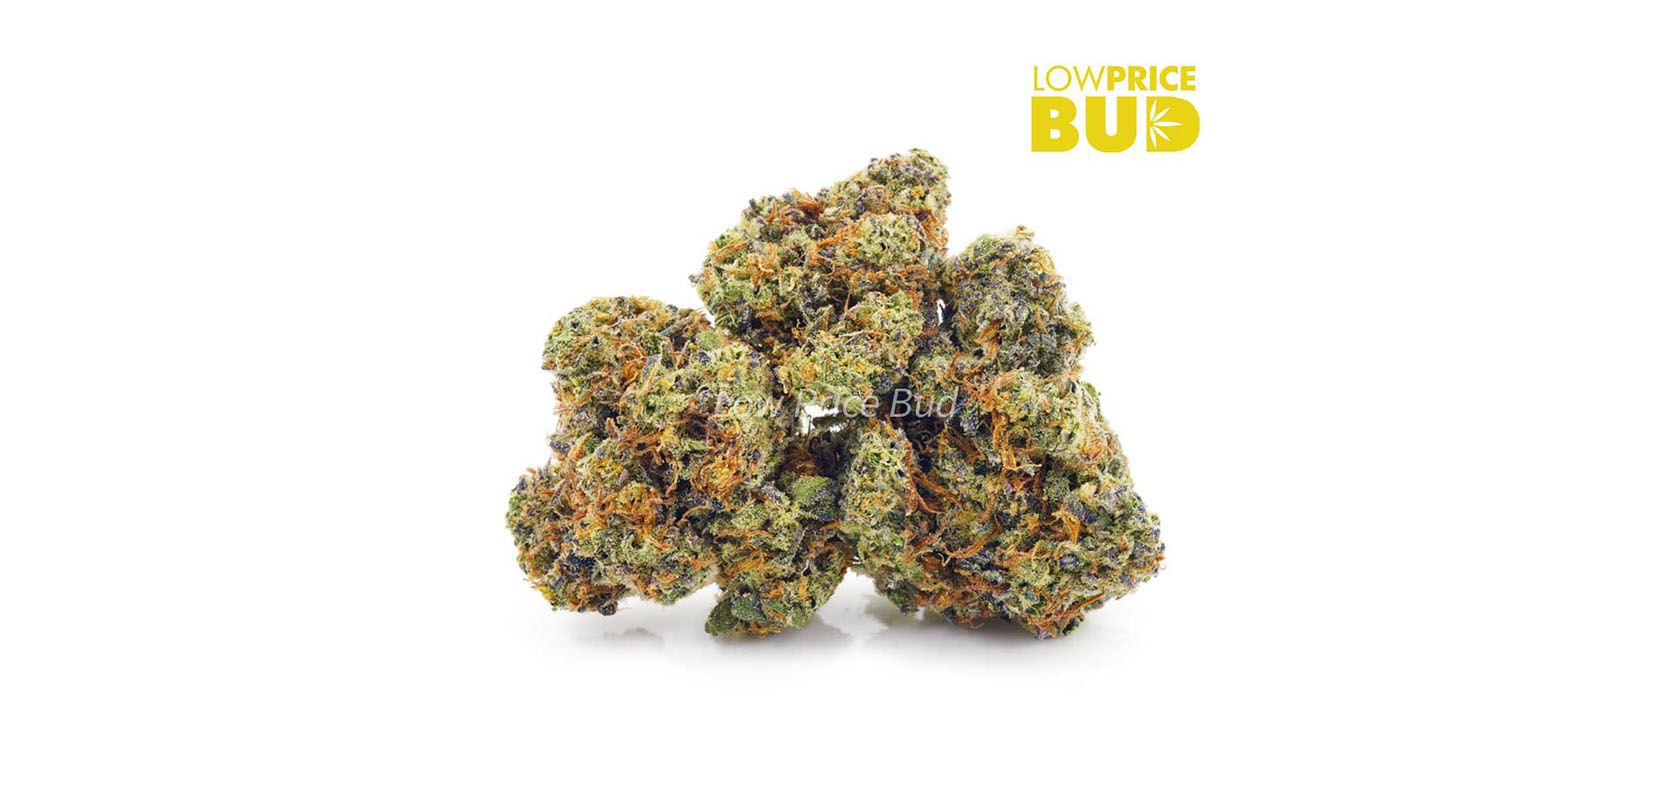 Watermelon Zkittles weed online. Buy AAAA weed from low price bud mail order marijuana shop canada. Best Weed Strain For Delicious Hash Flavour